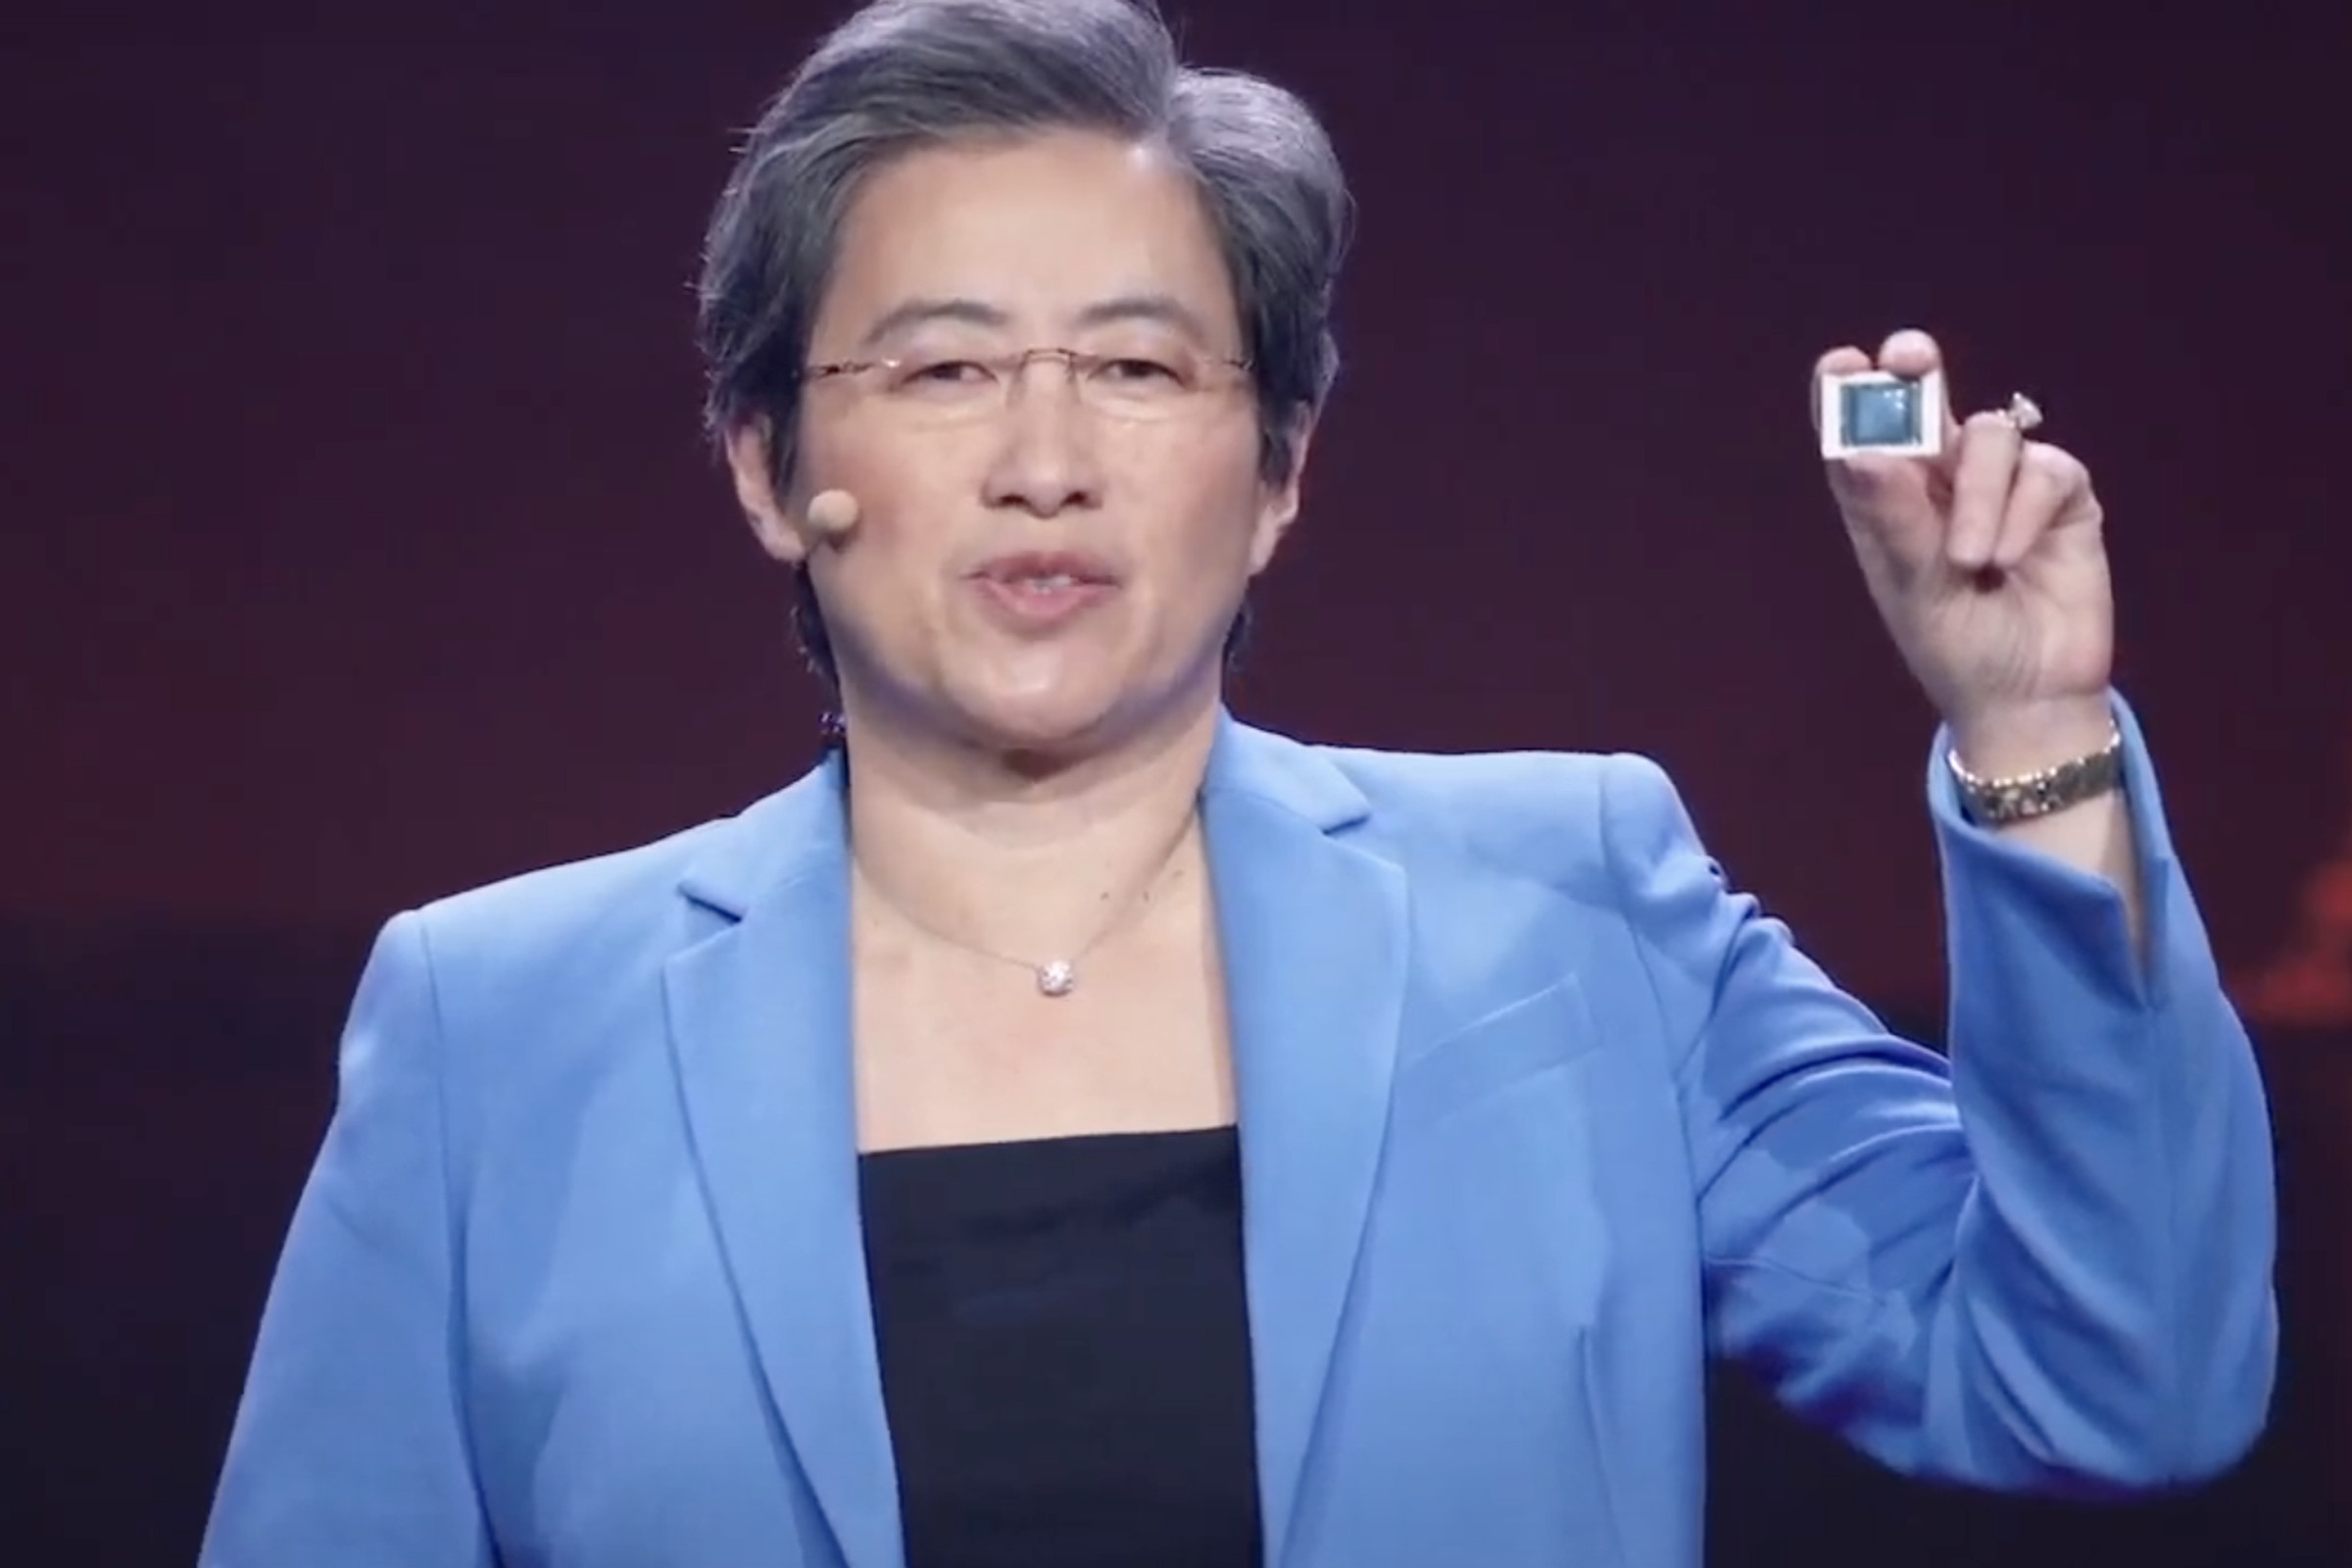 AMD CEO Lisa Su holds up a Ryzen 5000 mobile chip at CES 2021.